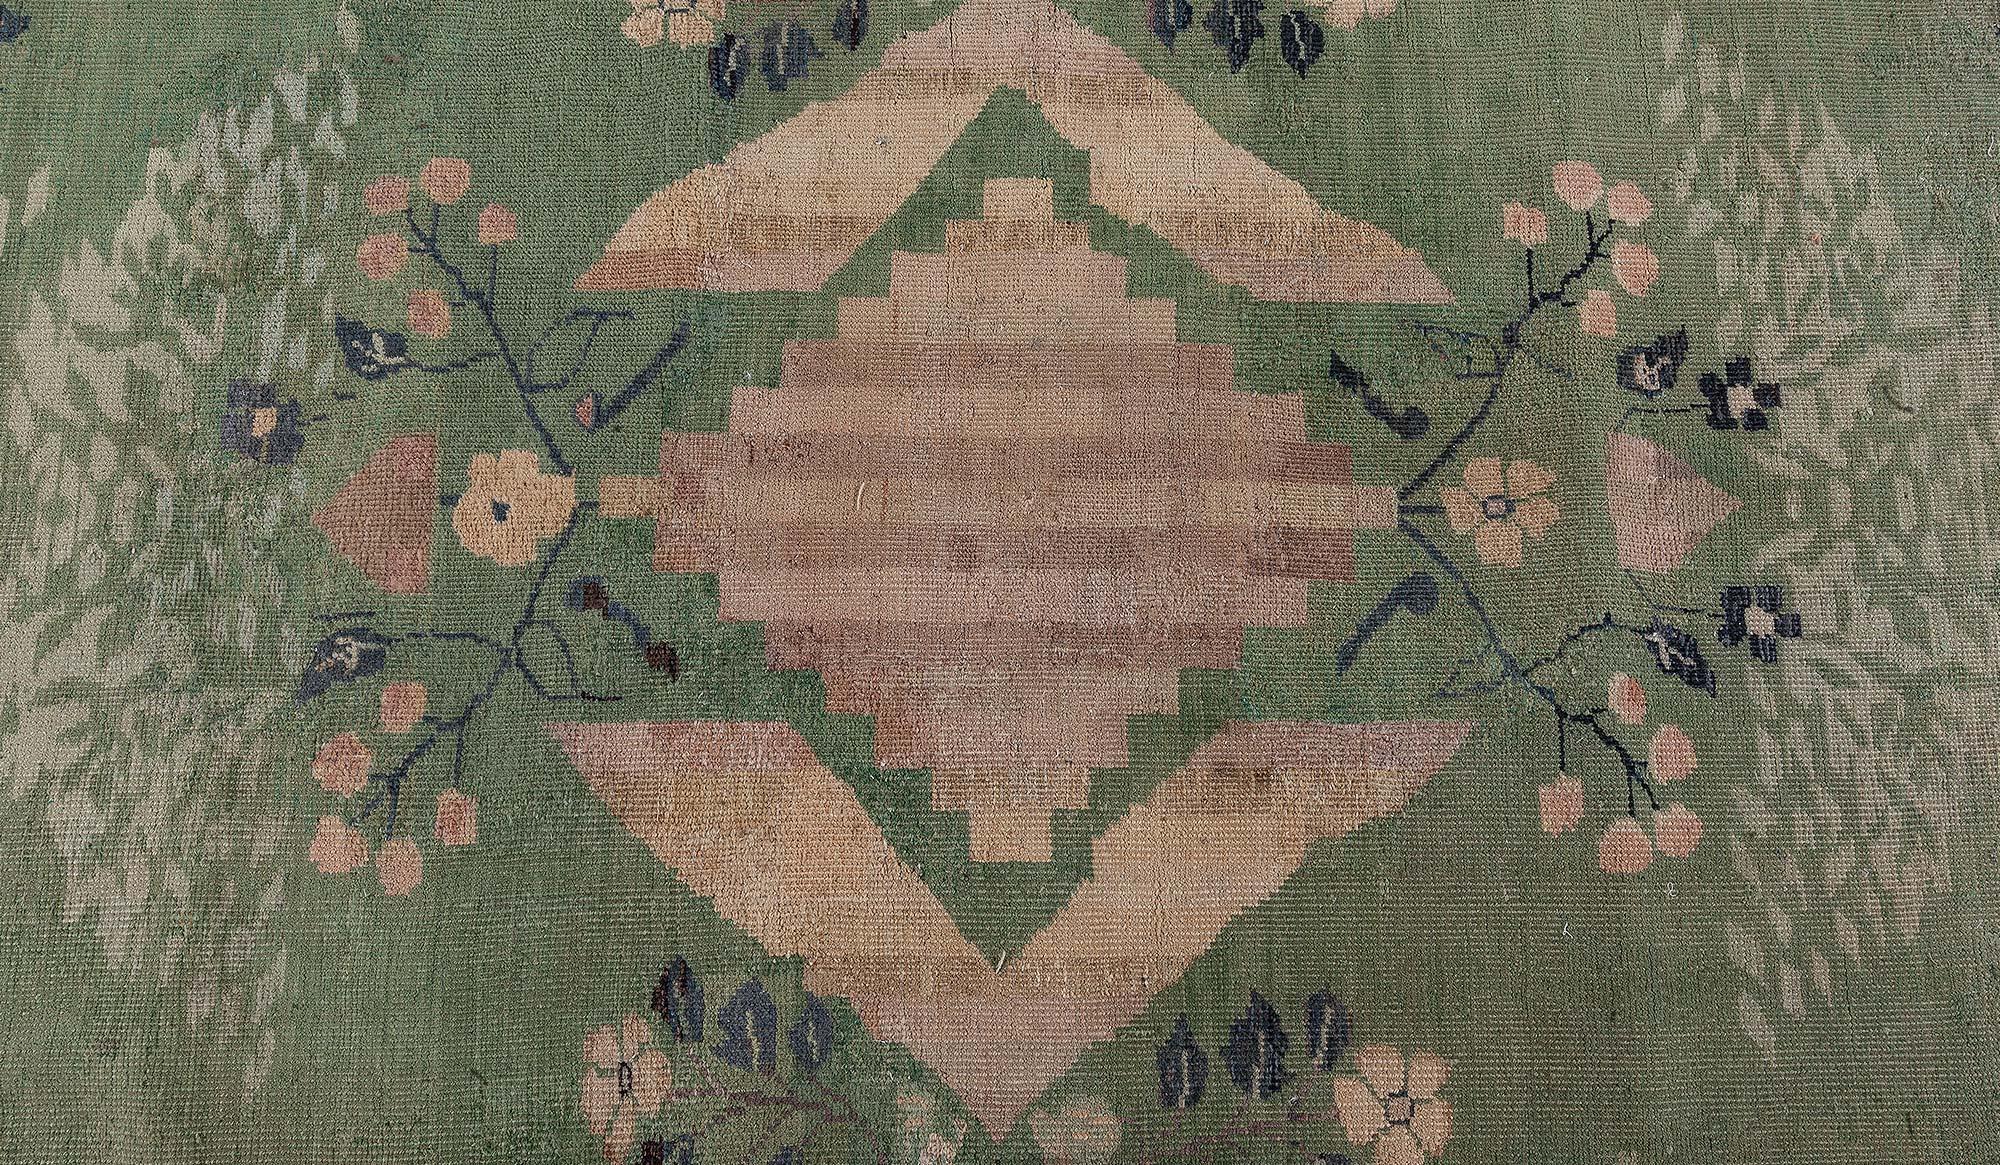 Chinese Art Deco Rug
Size: 11'10